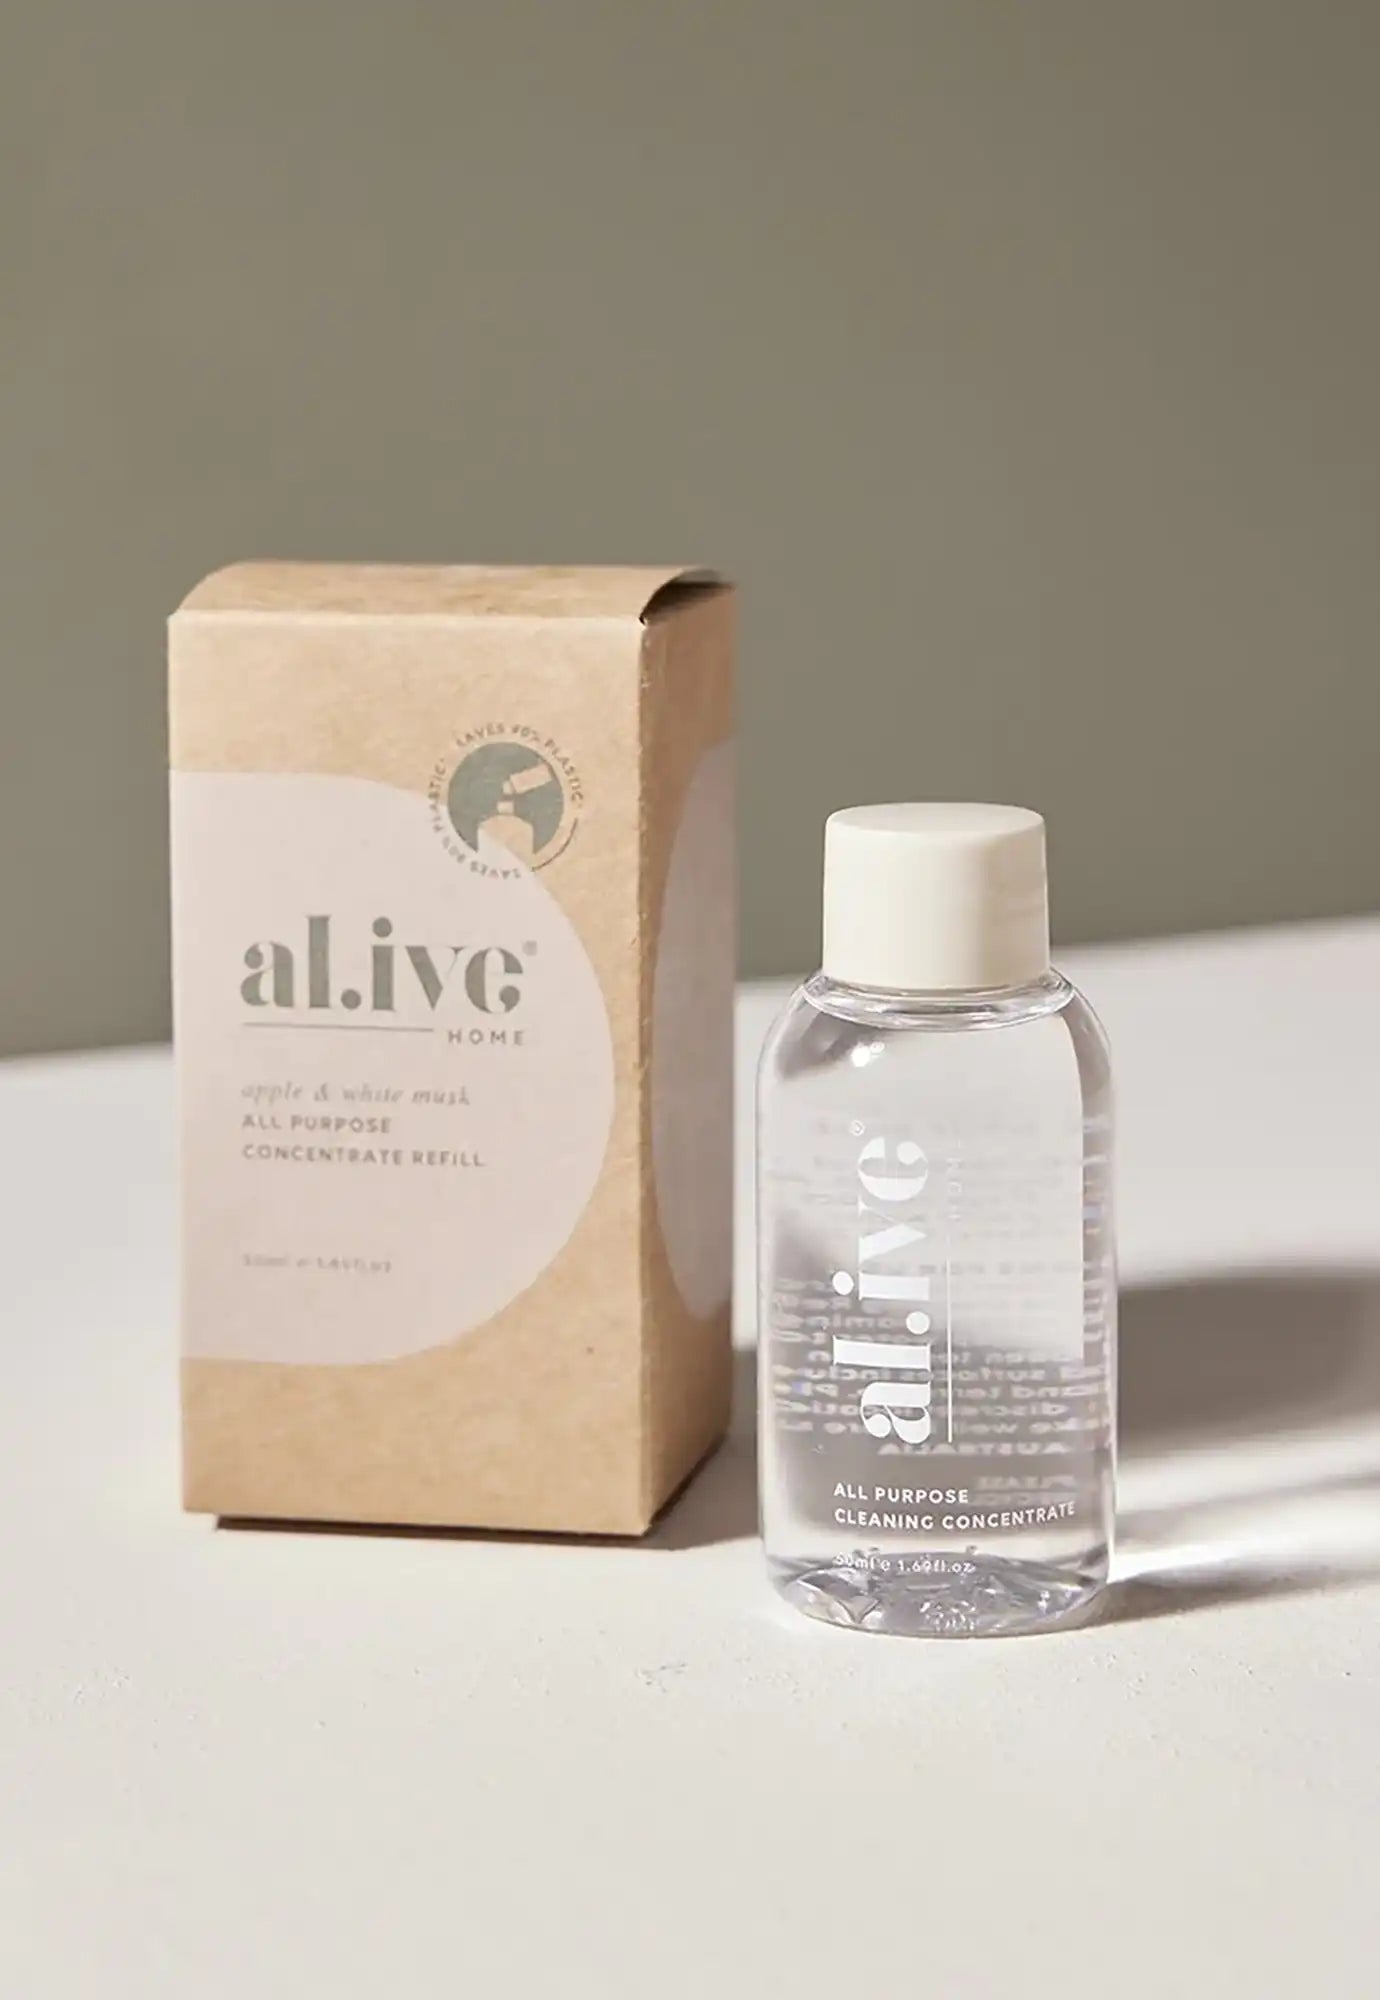 al.ive - home cleaning concentrate refills